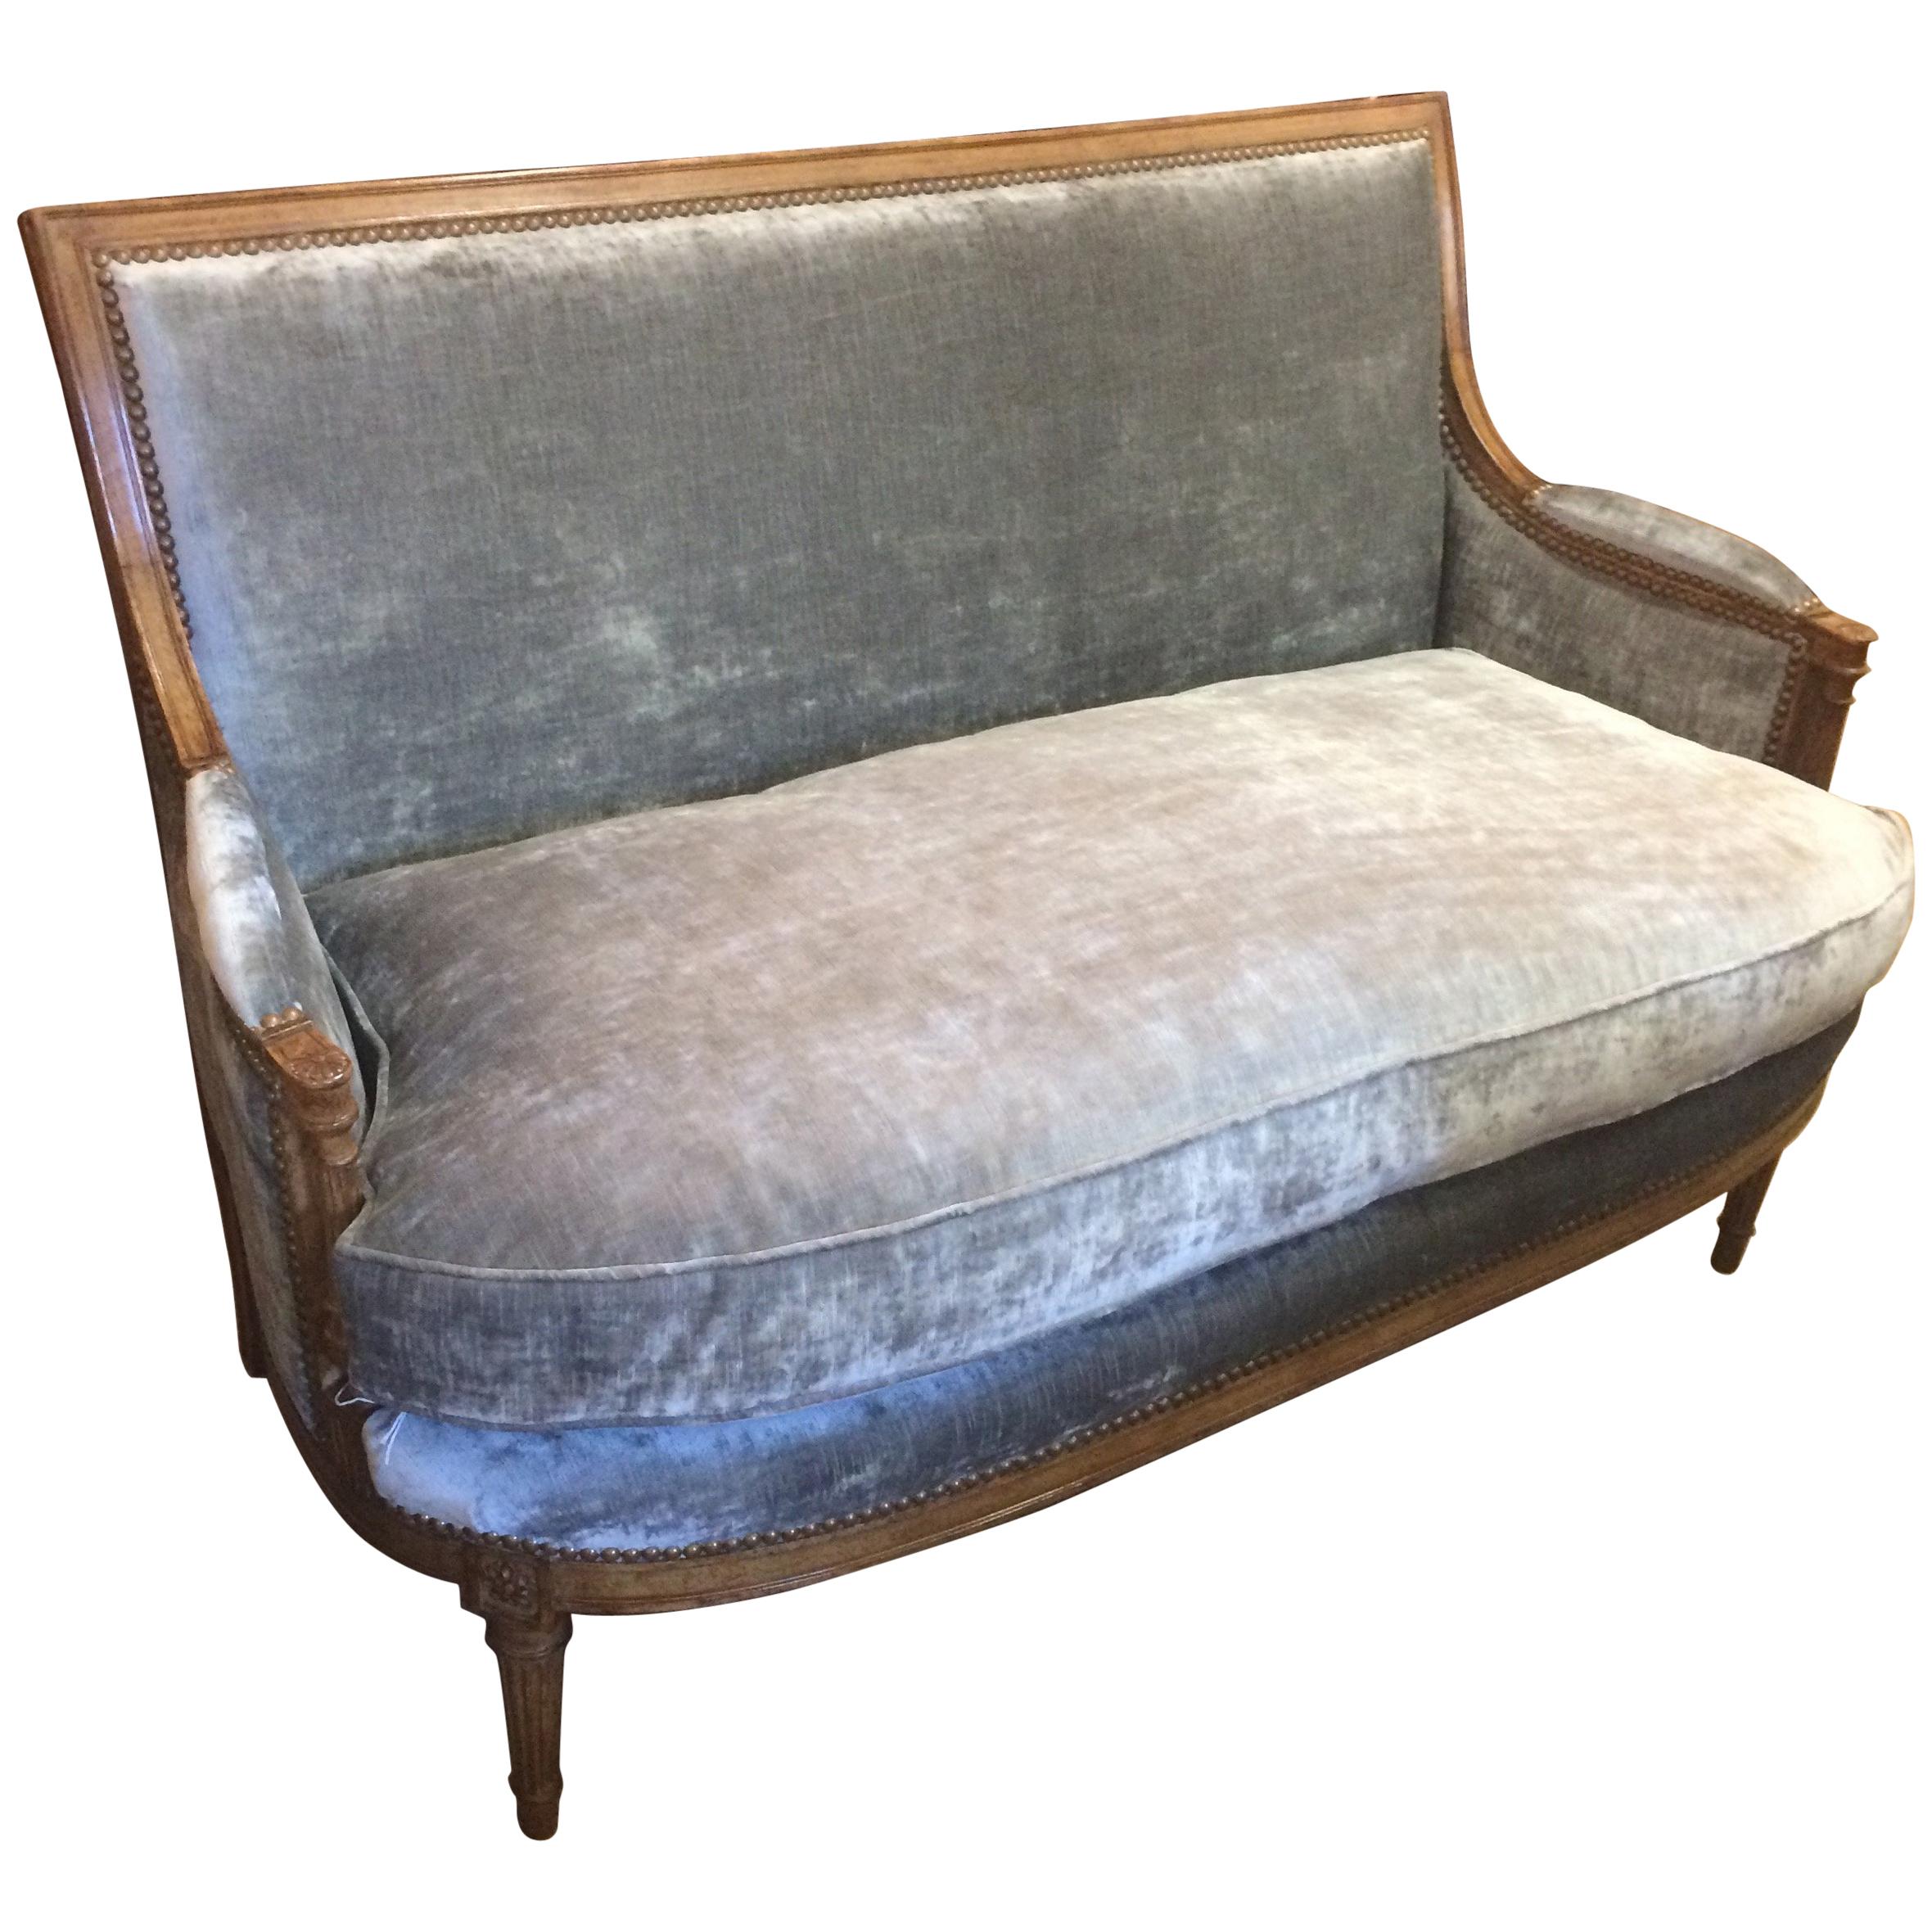 Dramatic Antique French Carved Wood and Velvet Neoclassical Loveseat Settee